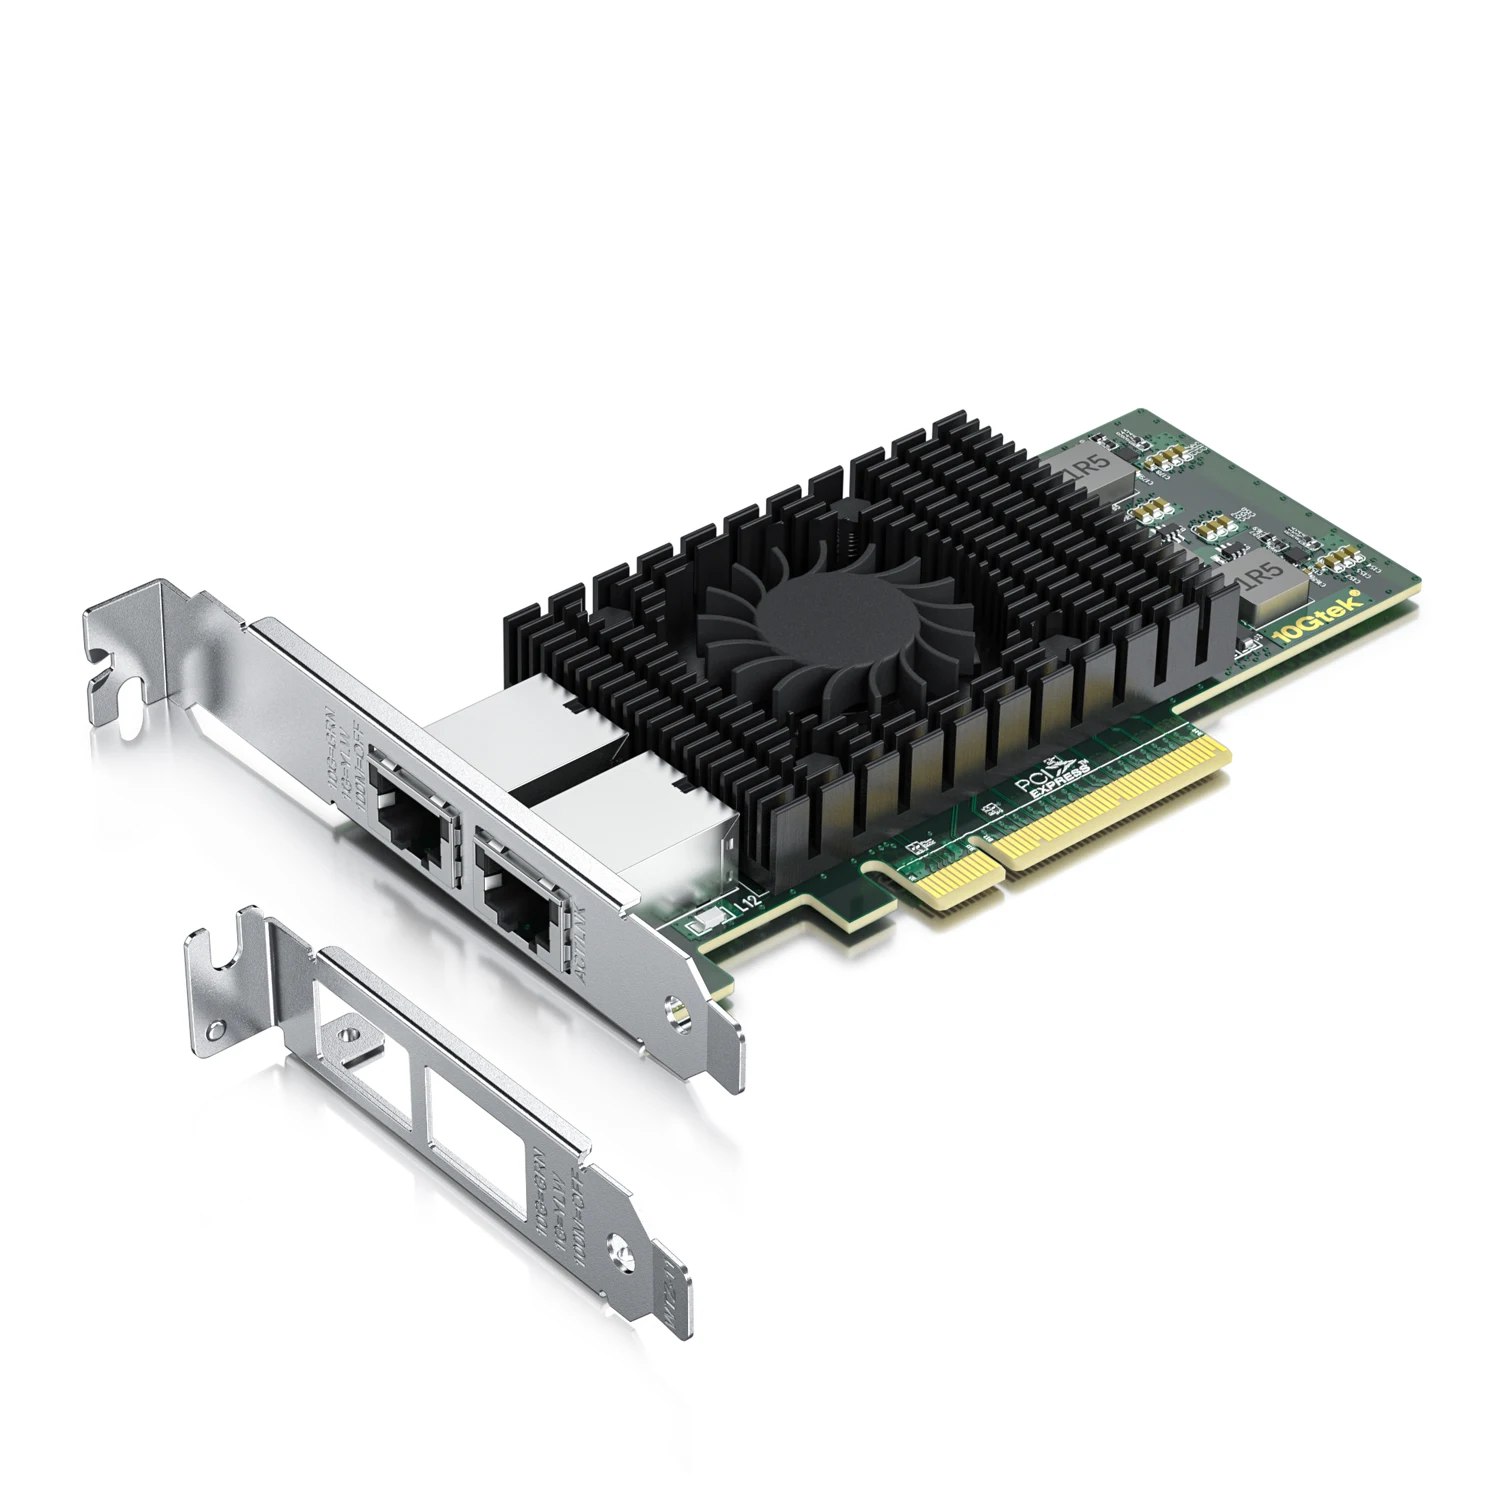 10Gb PCI-E NIC Network Card, PCI Express Ethernet LAN Adapter Support Windows Server/Windows/Linux/ESX, Compare to Intel X540-T2 10gb pci e nic network card with broadcom bcm57810s chipset pci express ethernet lan adapter support windows server linux